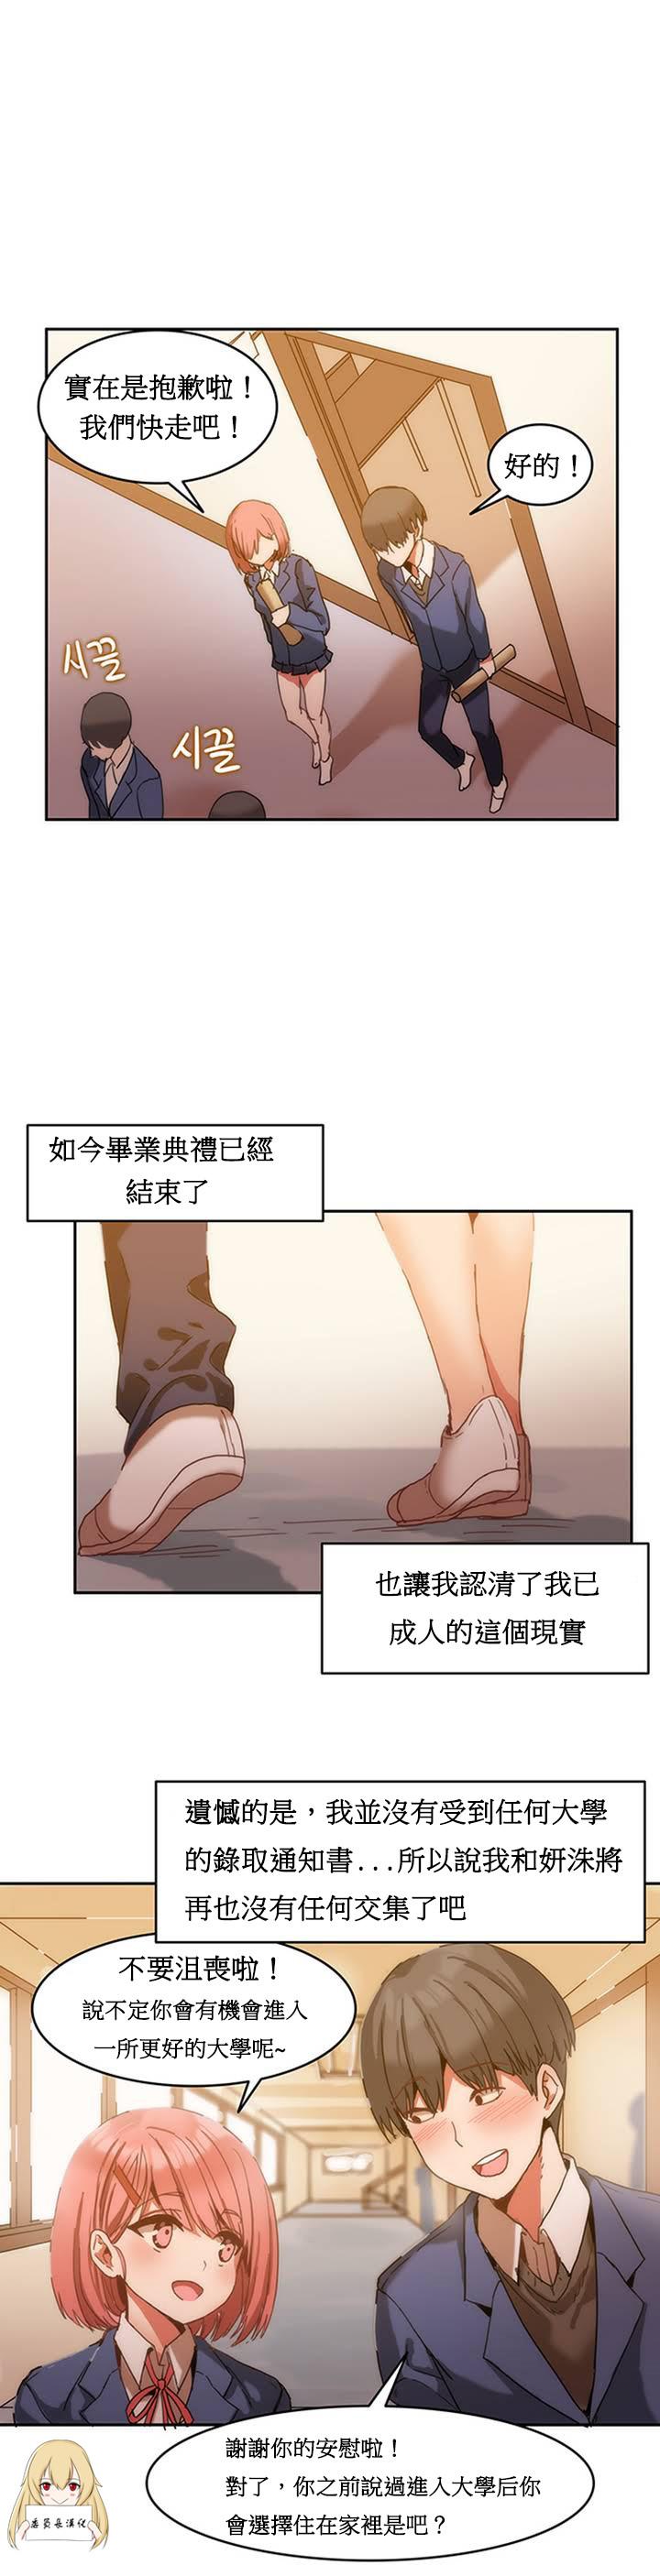 Yanks Featured Hahri's Lumpy Boardhouse Ch. 0~24【委員長個人漢化】（持續更新） Nut - Page 6